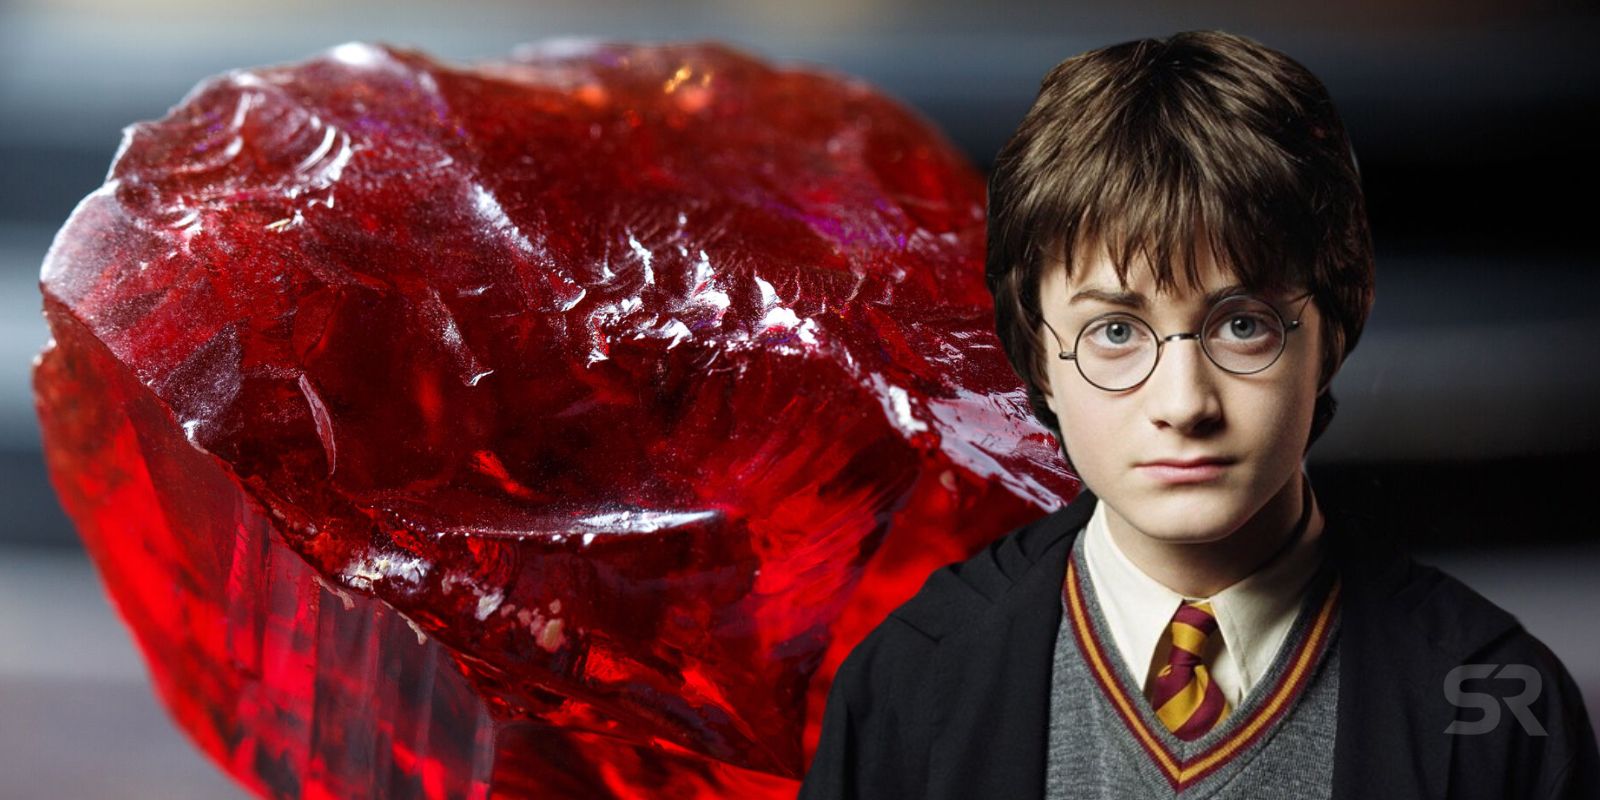 Harry Potter The Sorcerer’s Stone Explained (& Why It Was Destroyed)